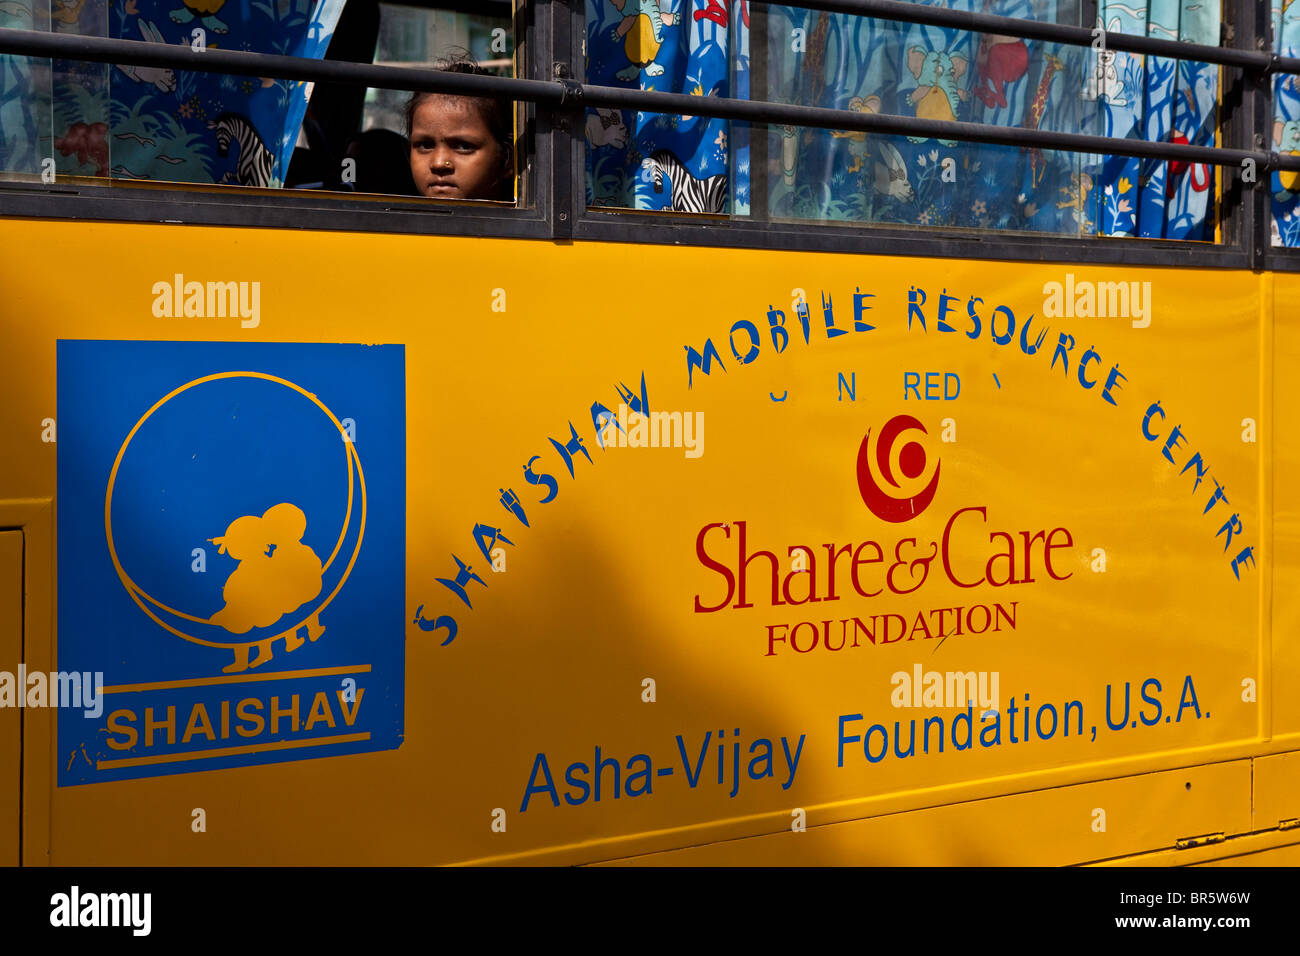 A child looks out of the window of one of the Mobile Resource Centre’s run by the Shaishav Trust. Bhavnagara, India. Stock Photo